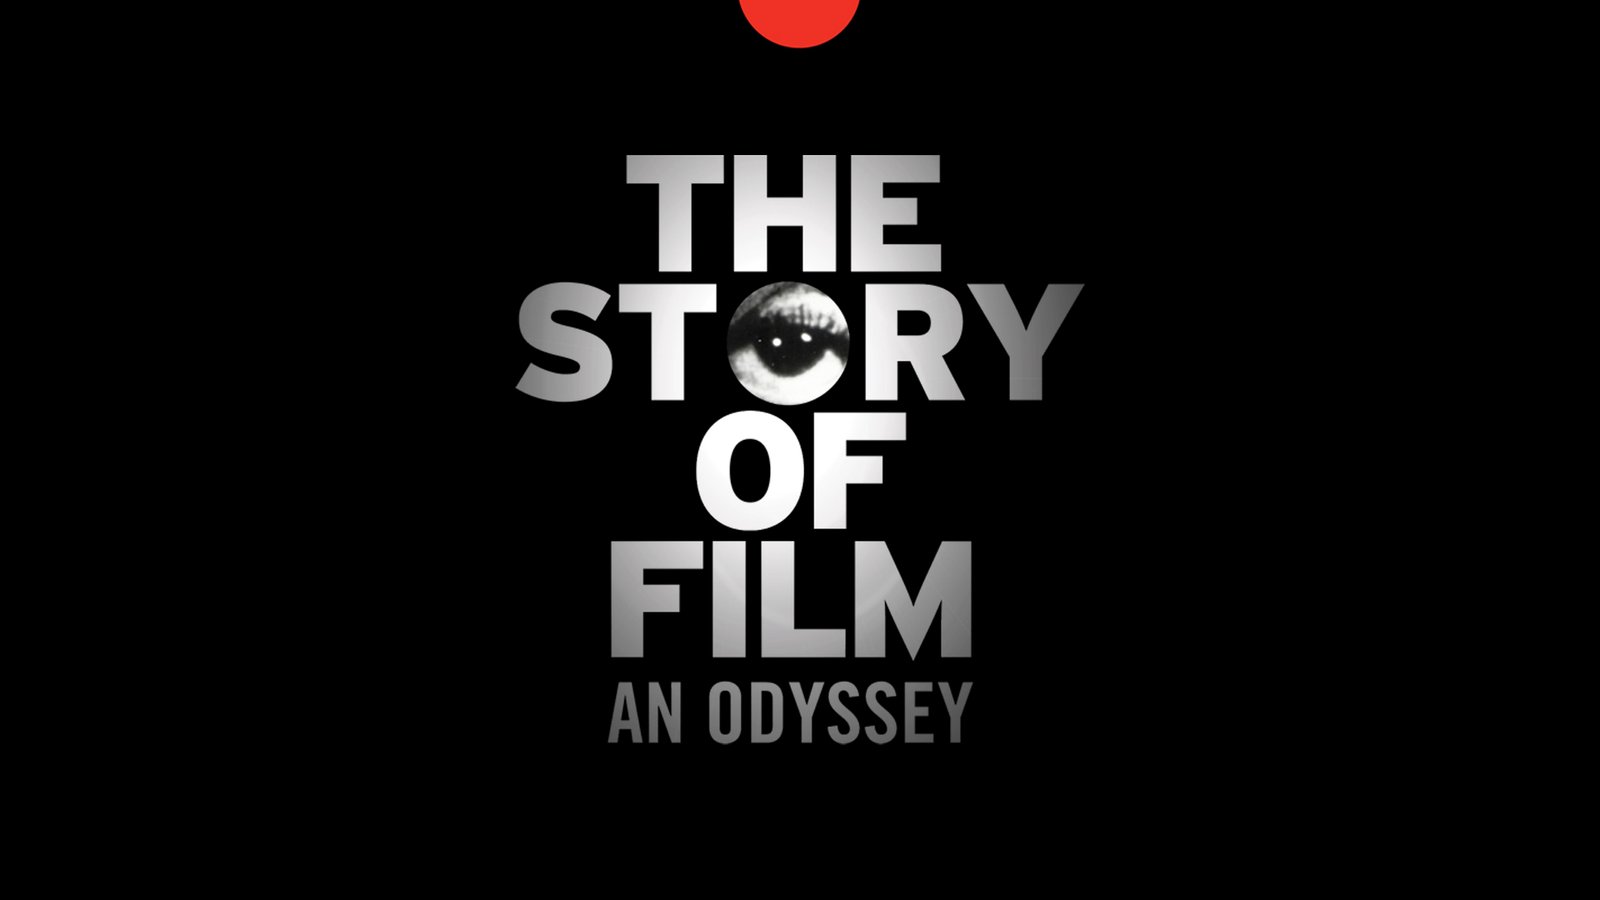 The Story of Film - An Odyssey